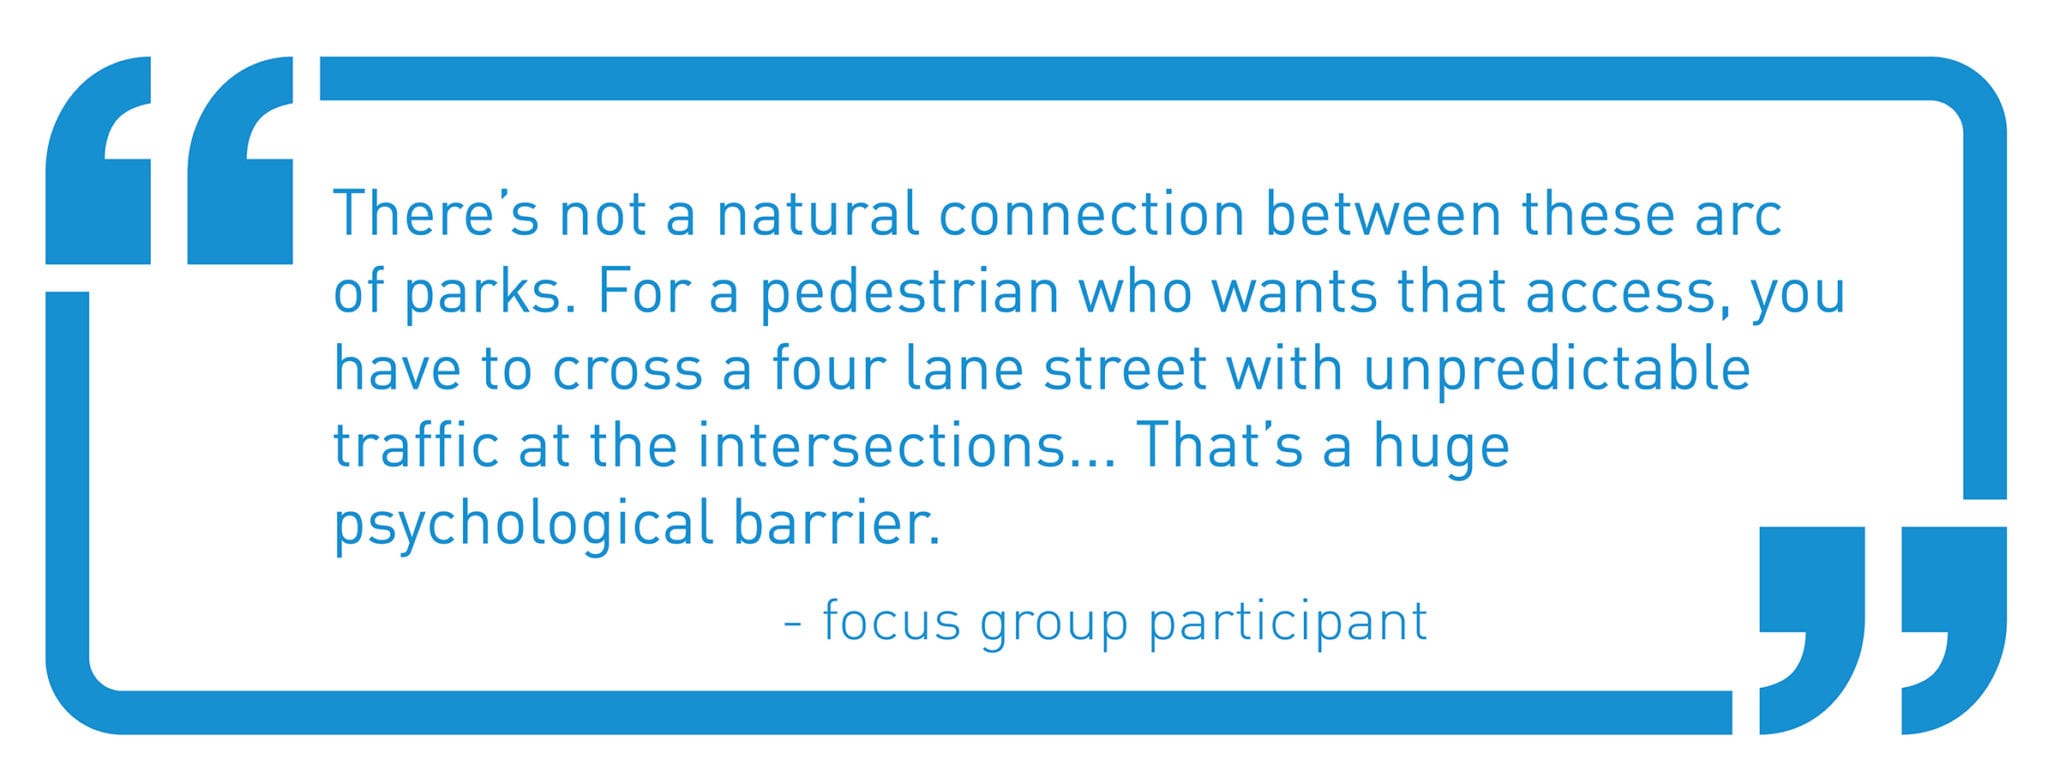 "There's not a natural connection between these arc of parks. For a pedestrian who wants that access, you have to cross a four lane street with unpredictable traffic at the intersections... That's a huge psychological barrier." Quote but a focus group participant.